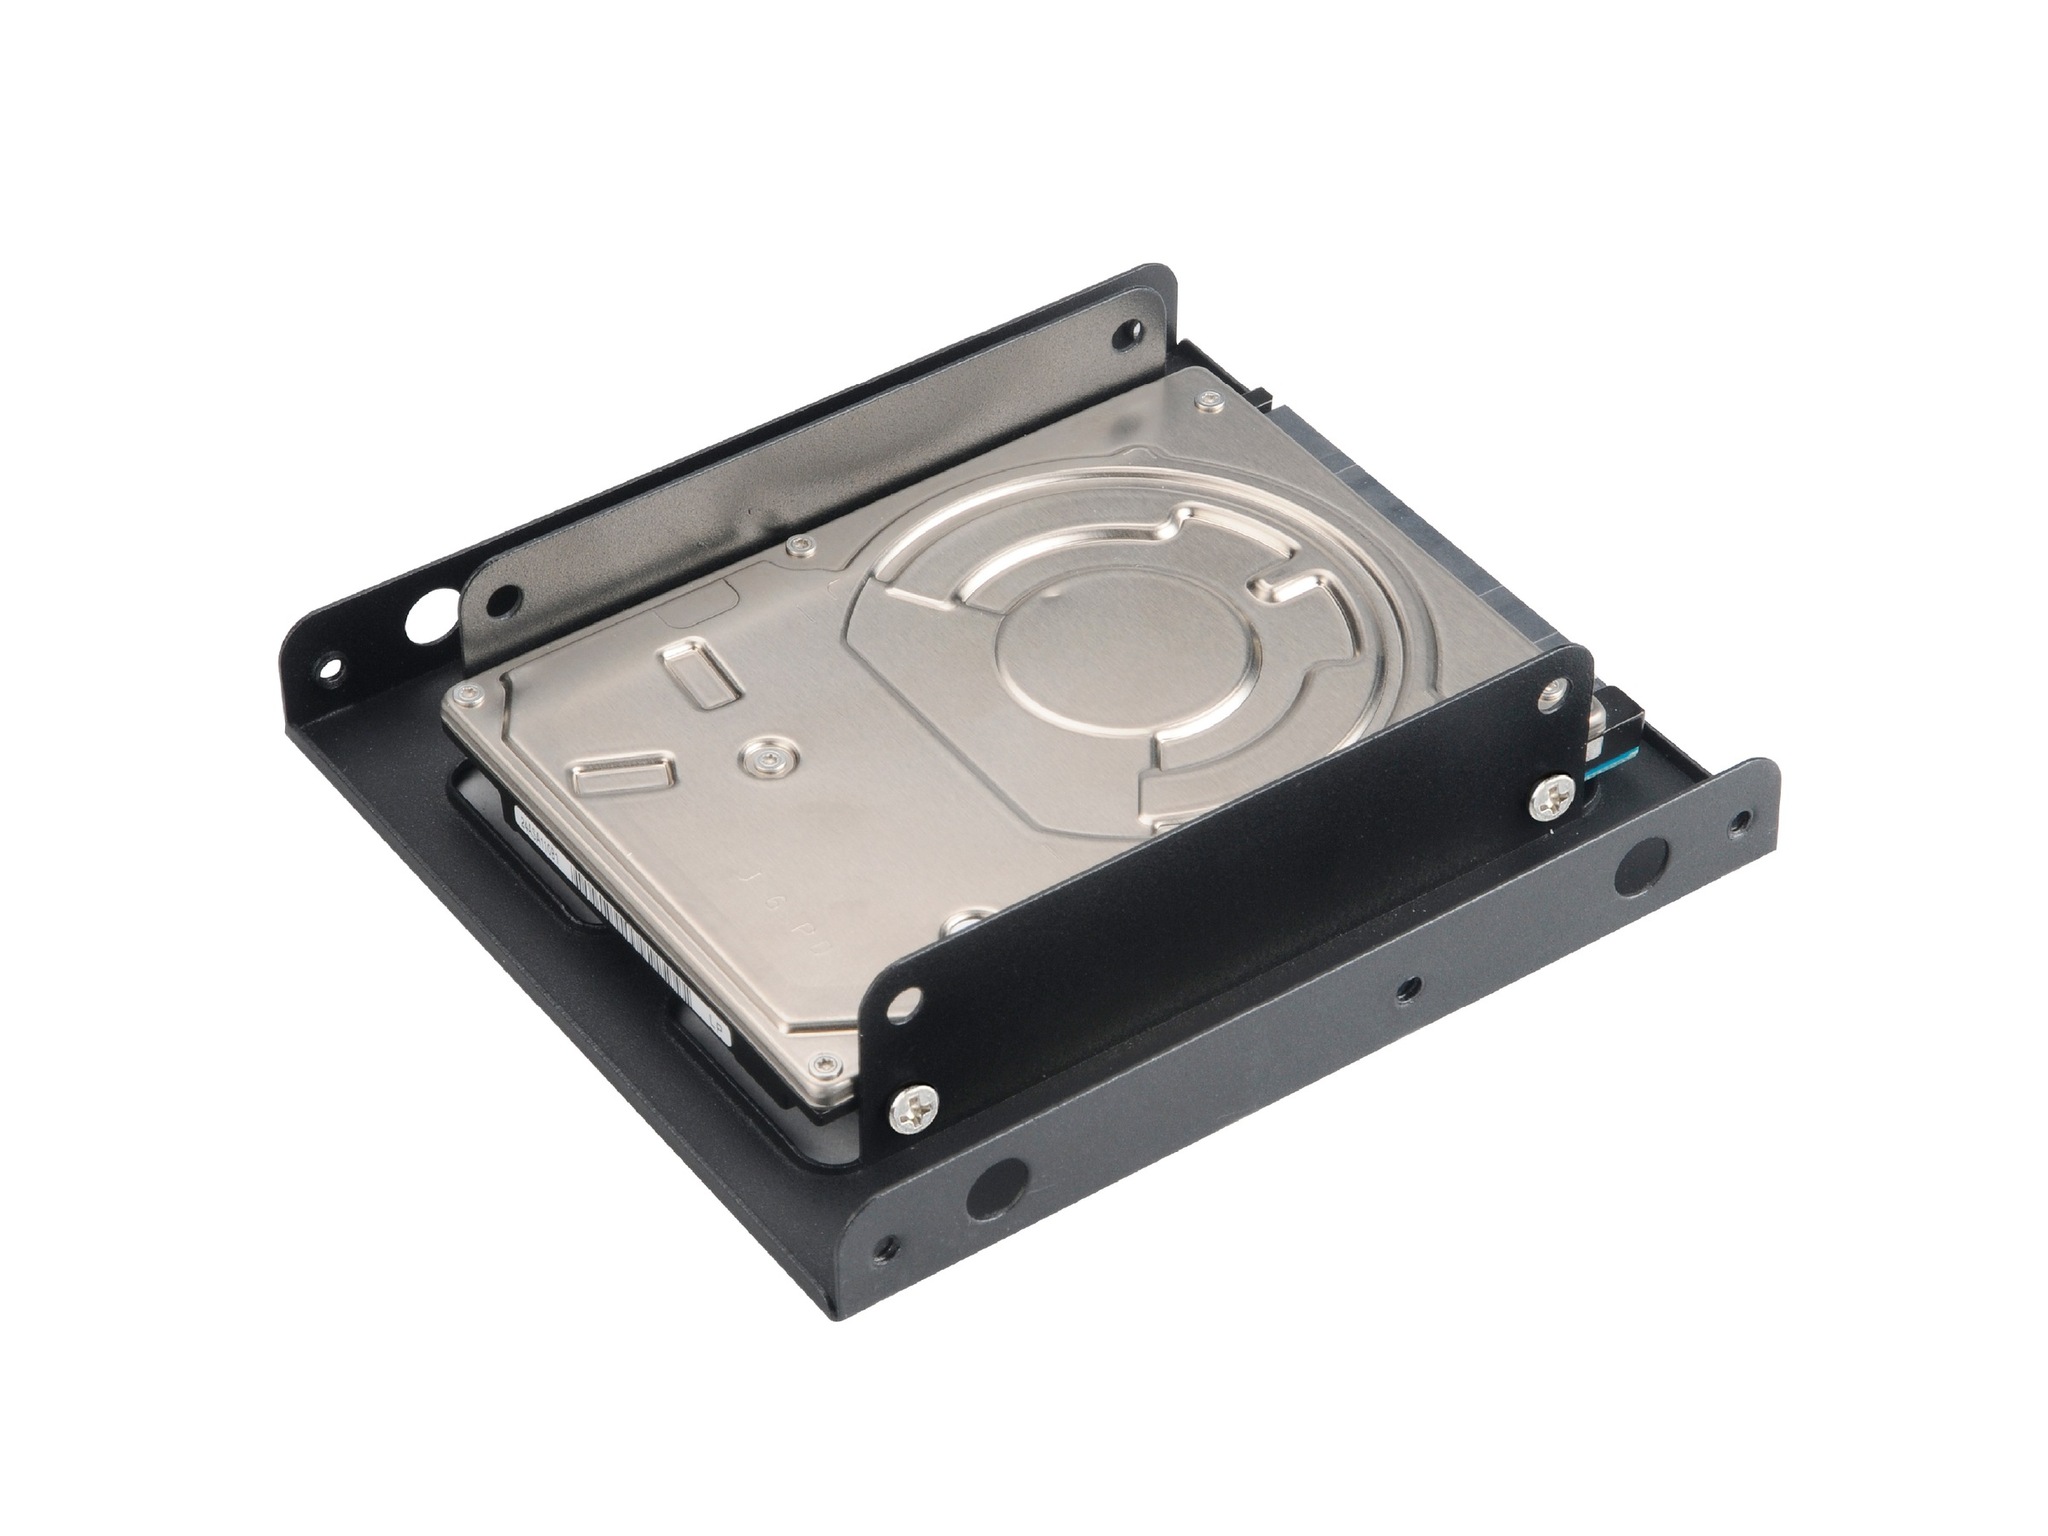 akasa SSD & HDD ramme for 2.5" SSD HDD adapter til 3.5" Bay